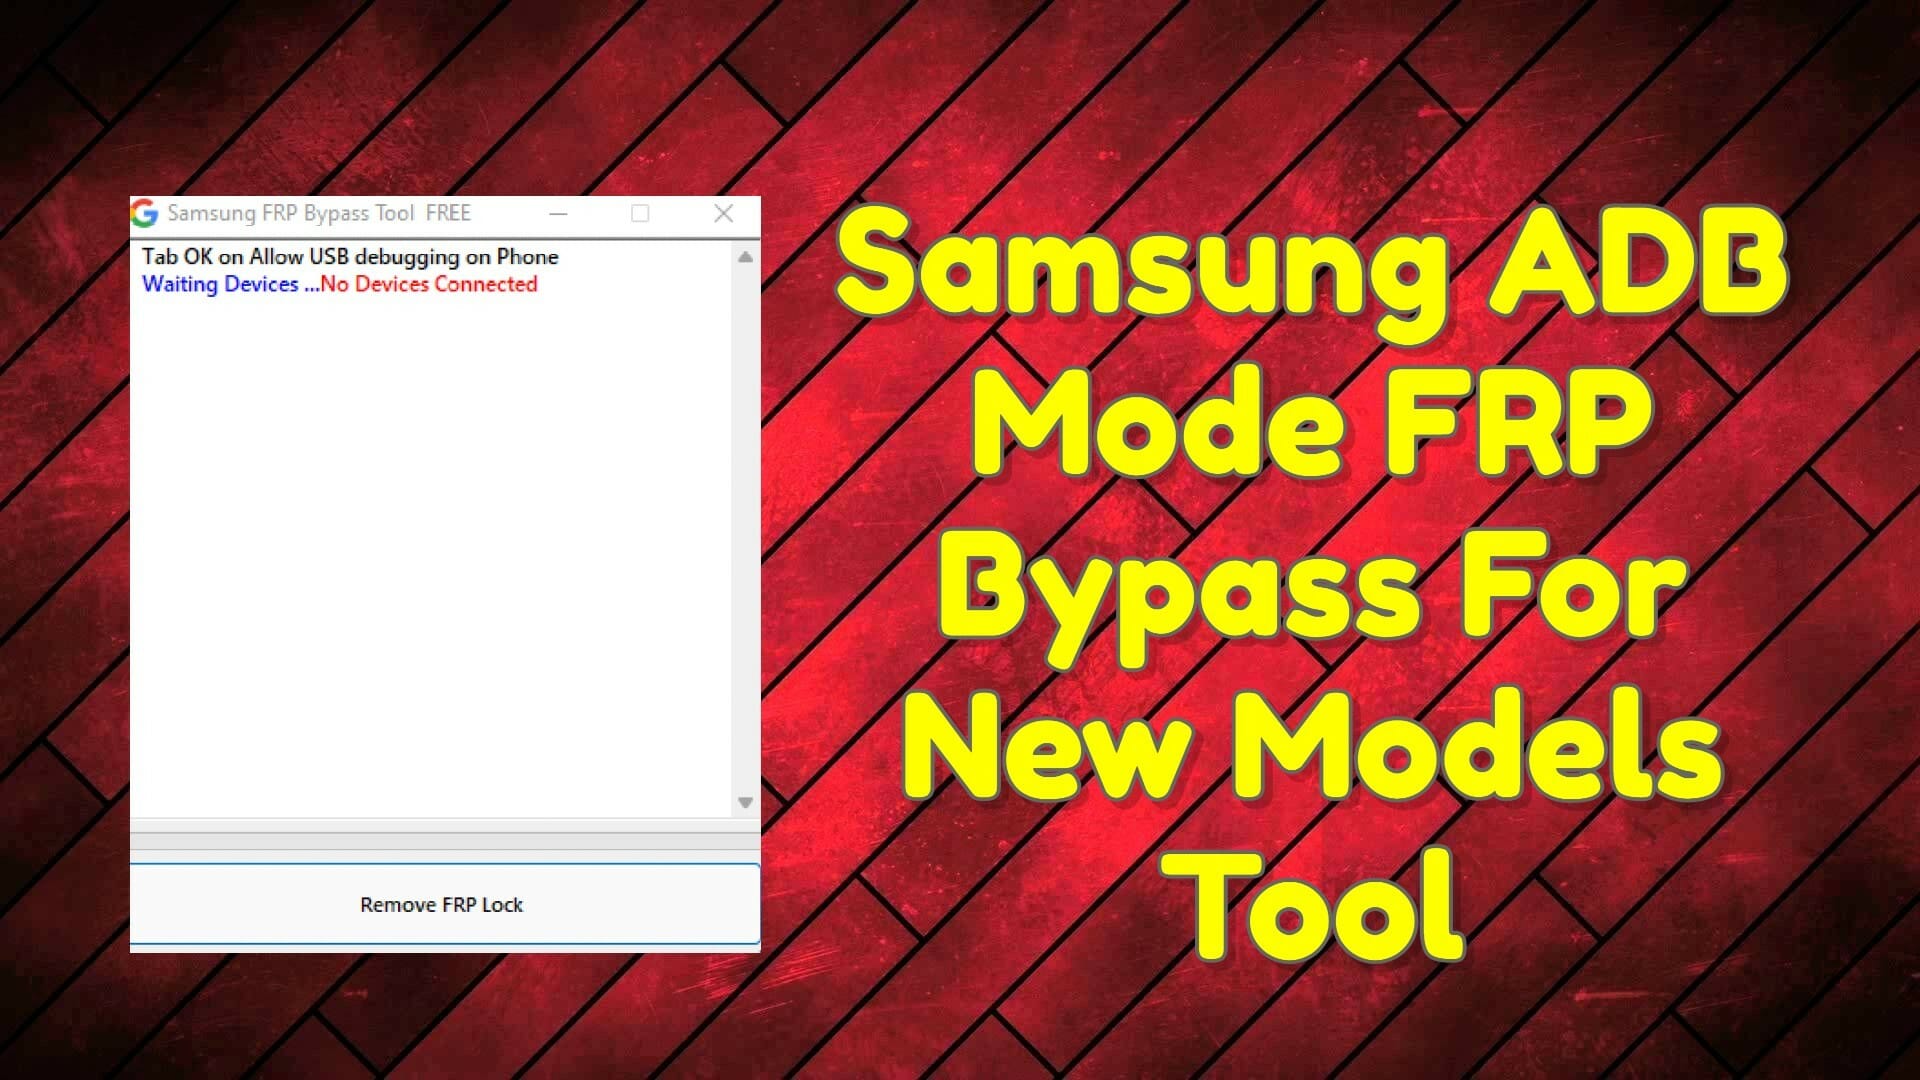 Samsung ADB Mode FRP Bypass For New Models Tool